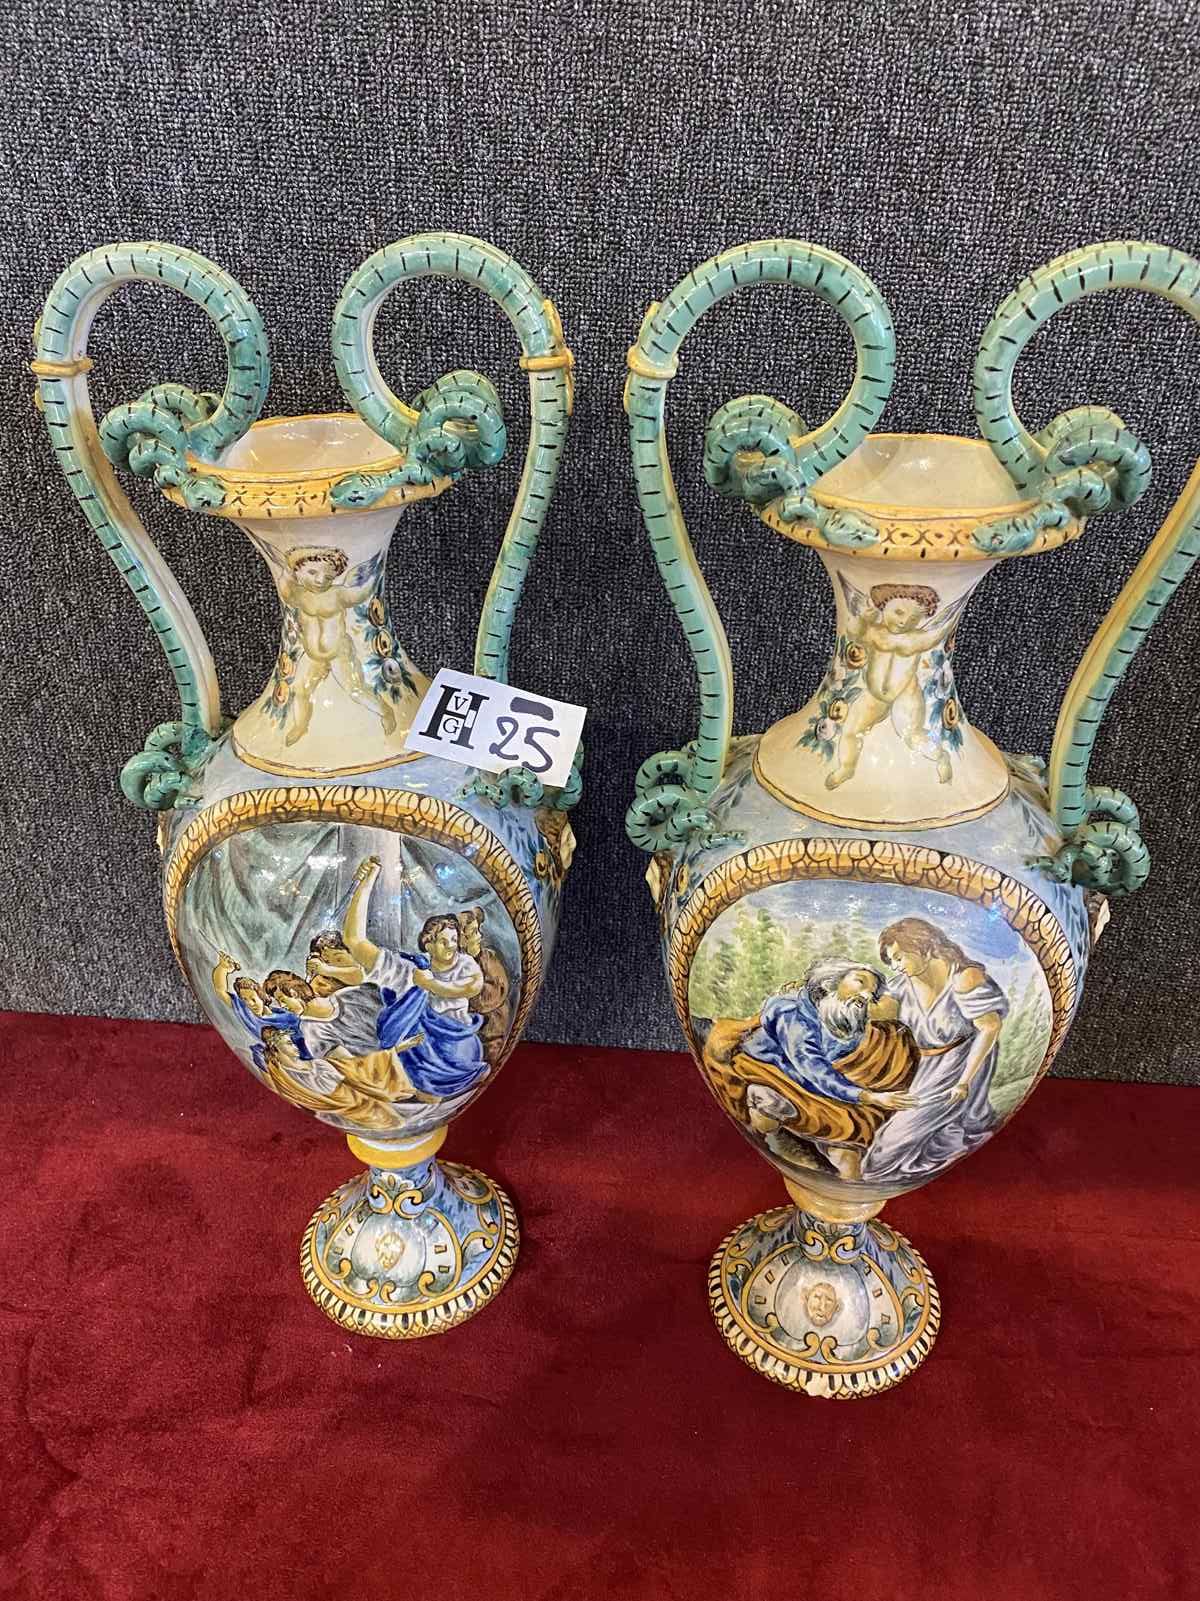 Mise à prix 100 € 
Large pair of Italian majolica or earthenware vases in the ta&hellip;